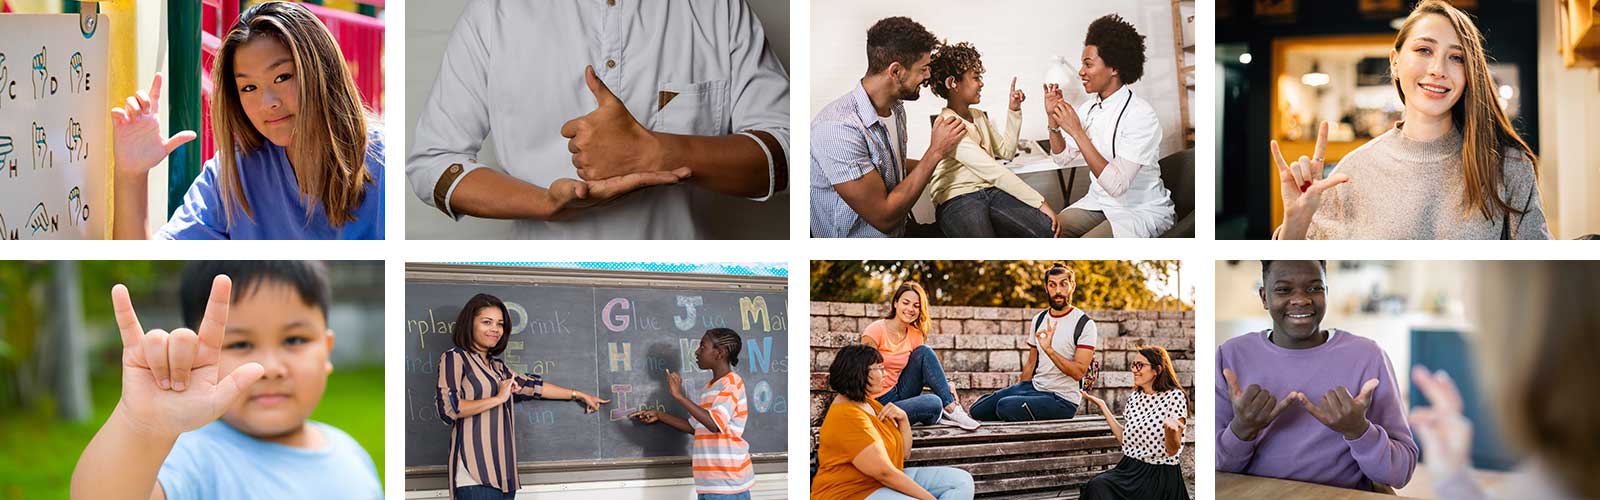 A selection of images of people using the American Sign Language